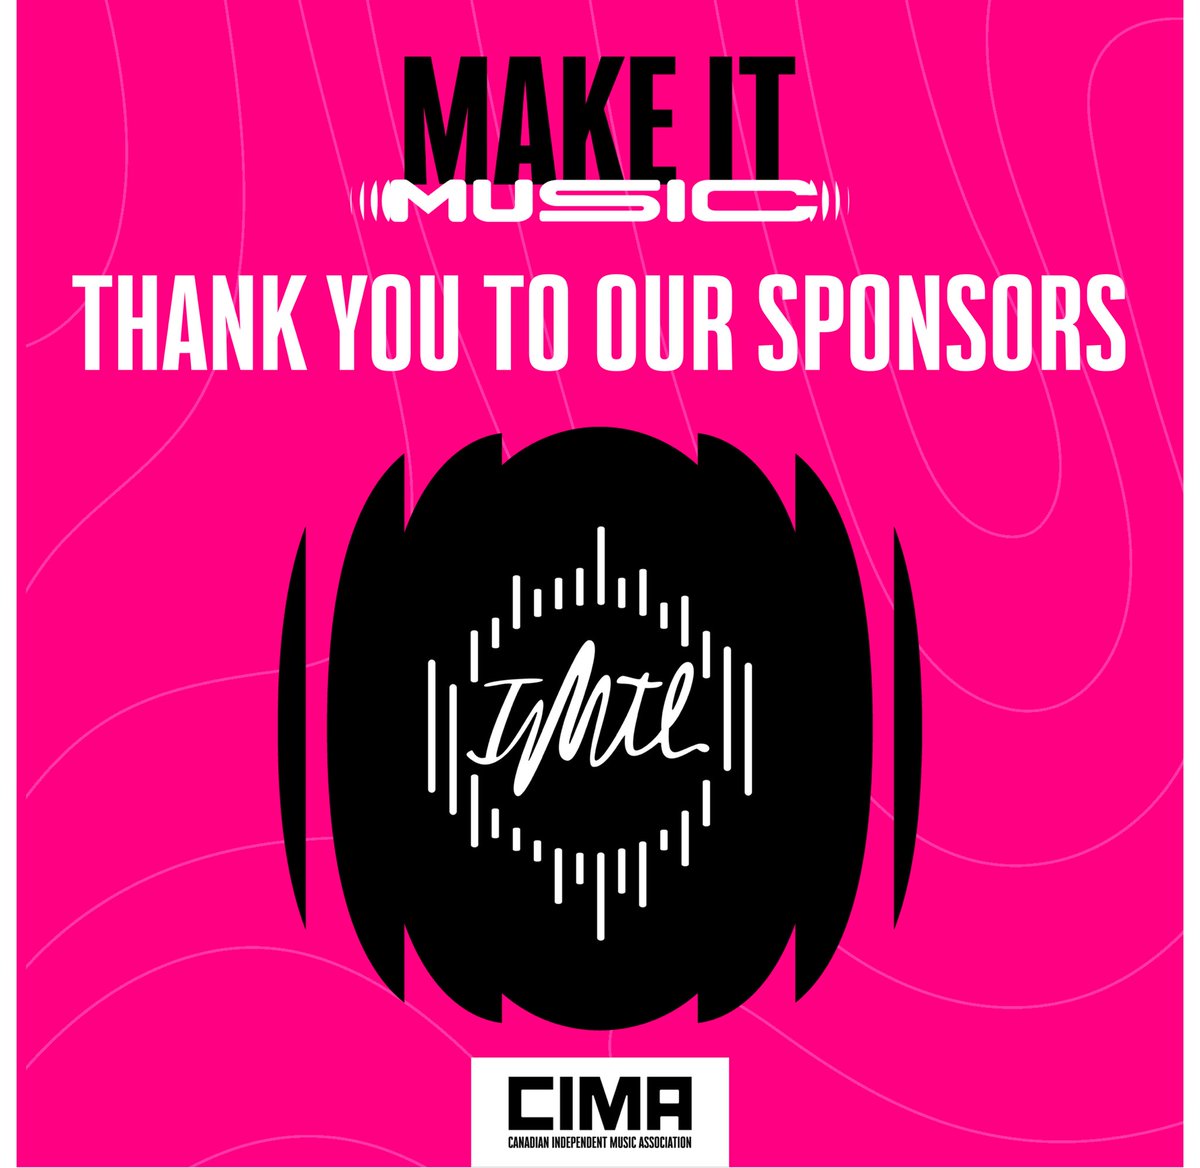 Shout out to the incredibly hardworking team at Indie Montreal, our official digital marketing provider for MAKE IT MUSIC this year. Thanks for helping us get the word out on all the kick-ass programming we have coming up, we couldn’t have done it without you! 👏 👏